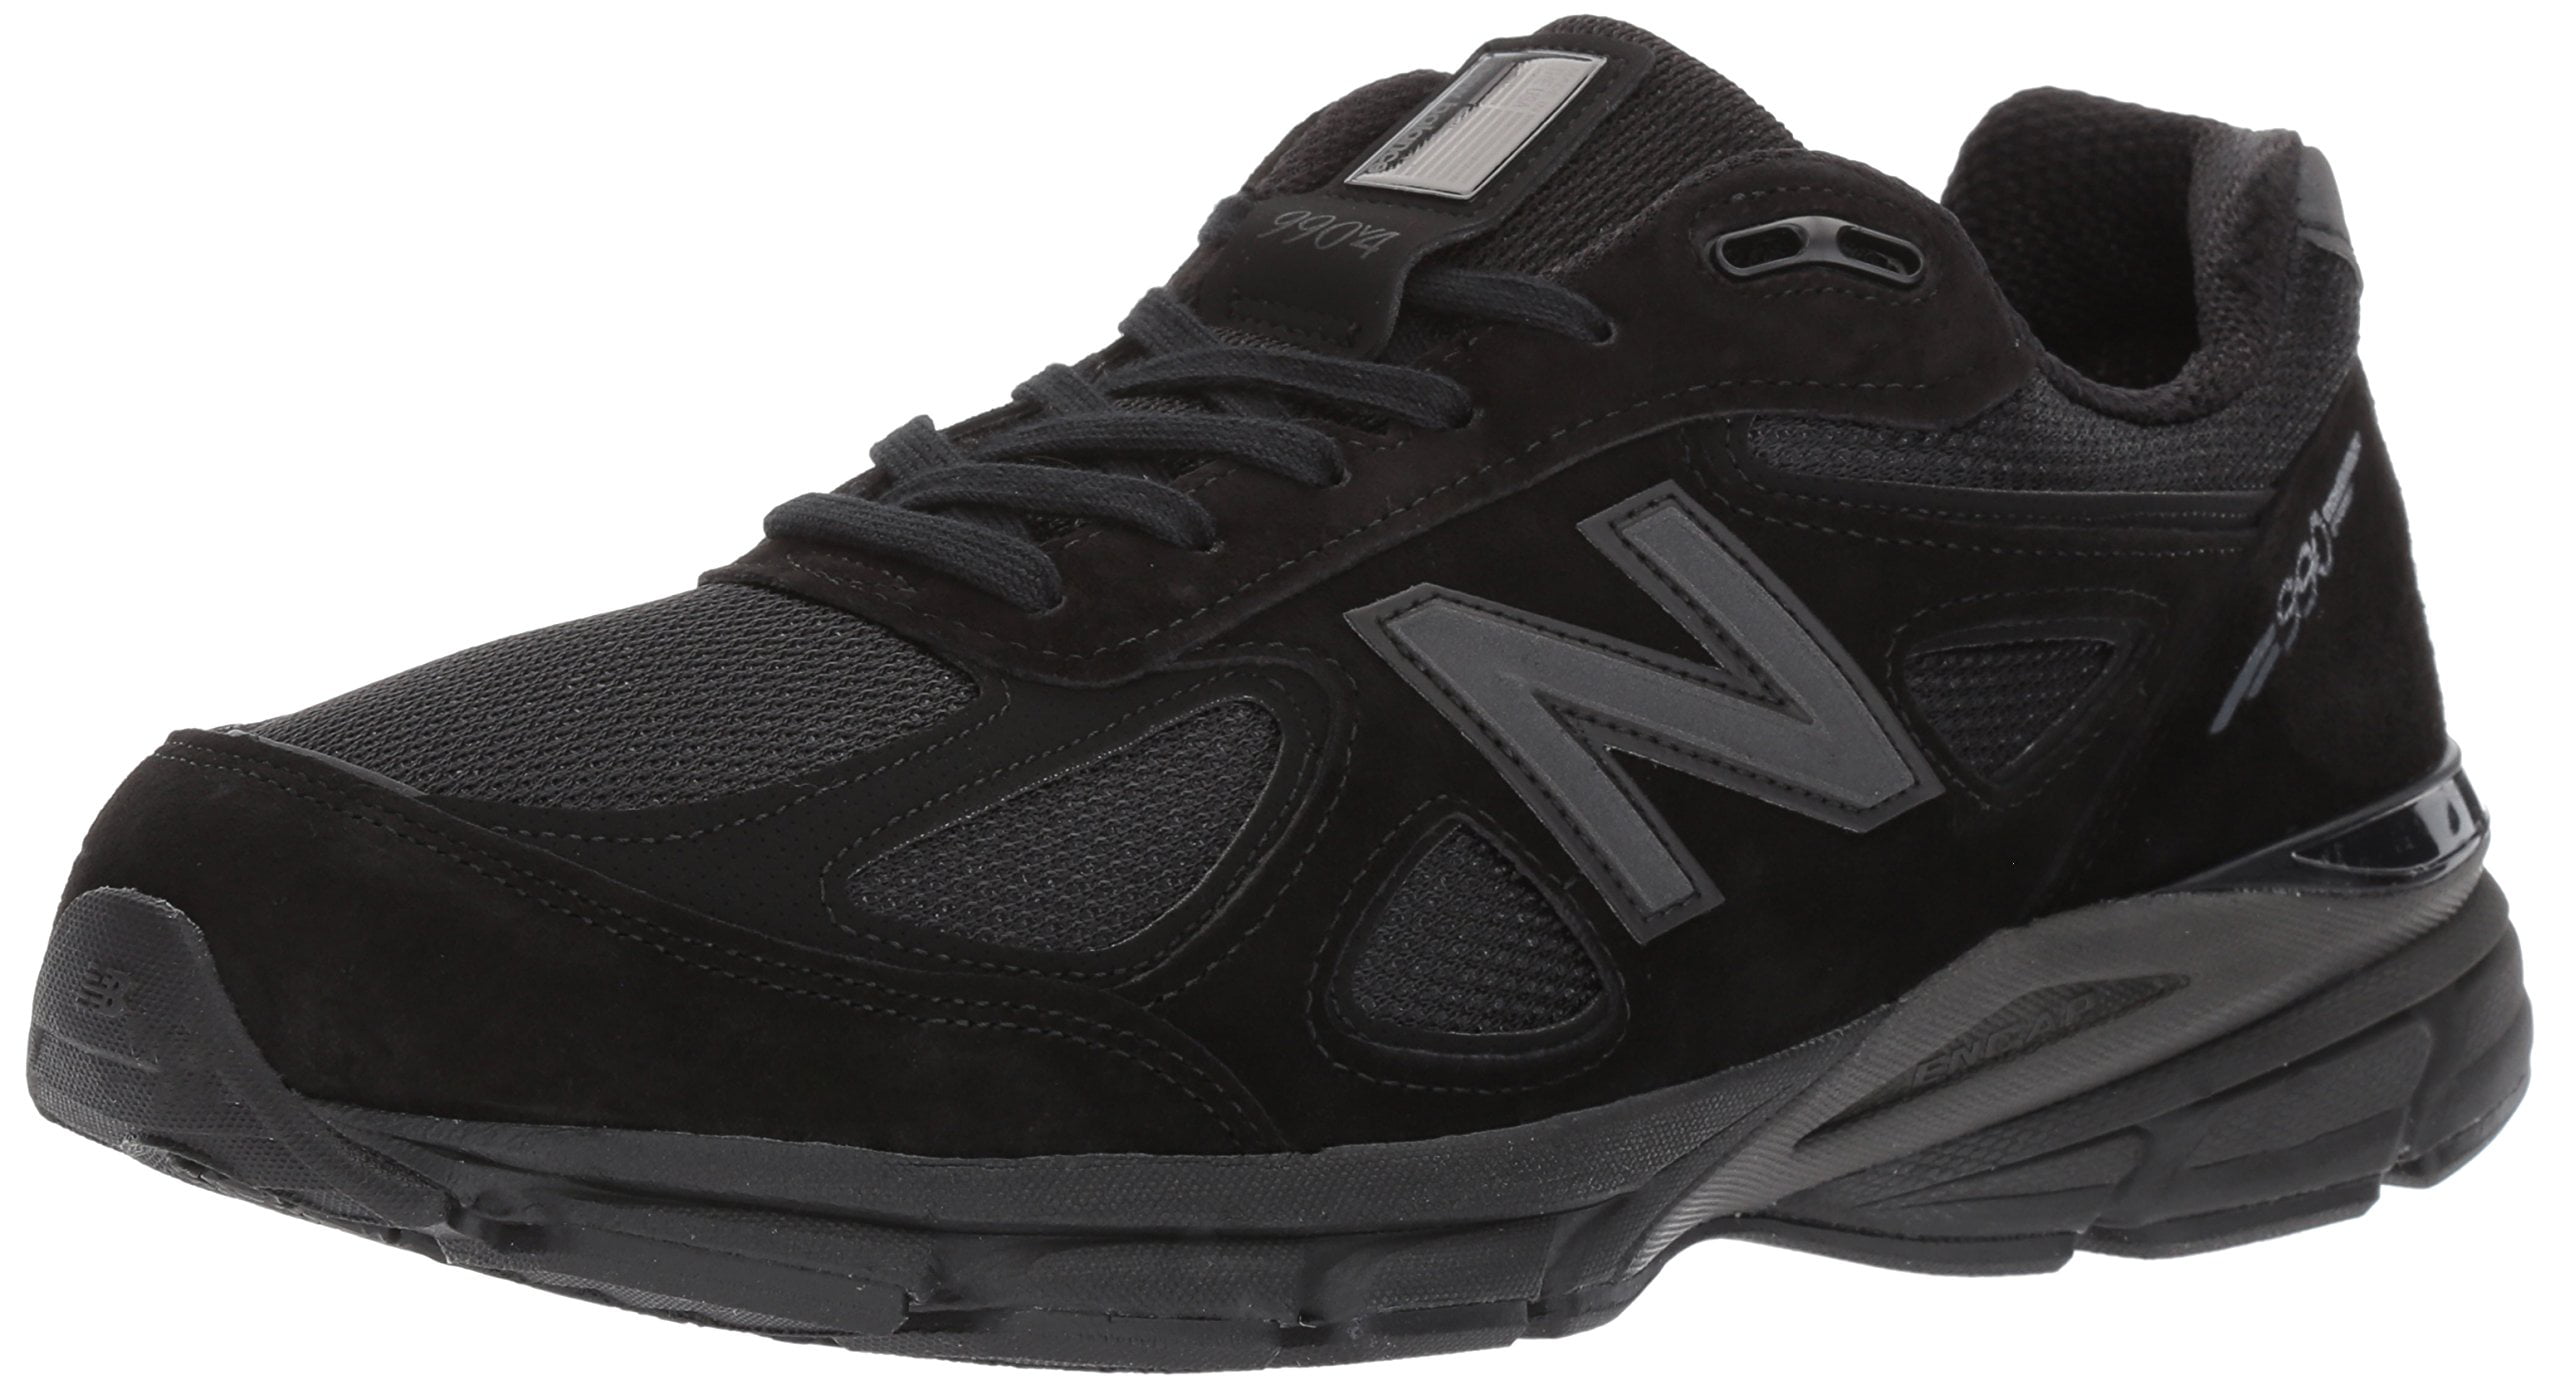 new balance men's running shoes made in usa